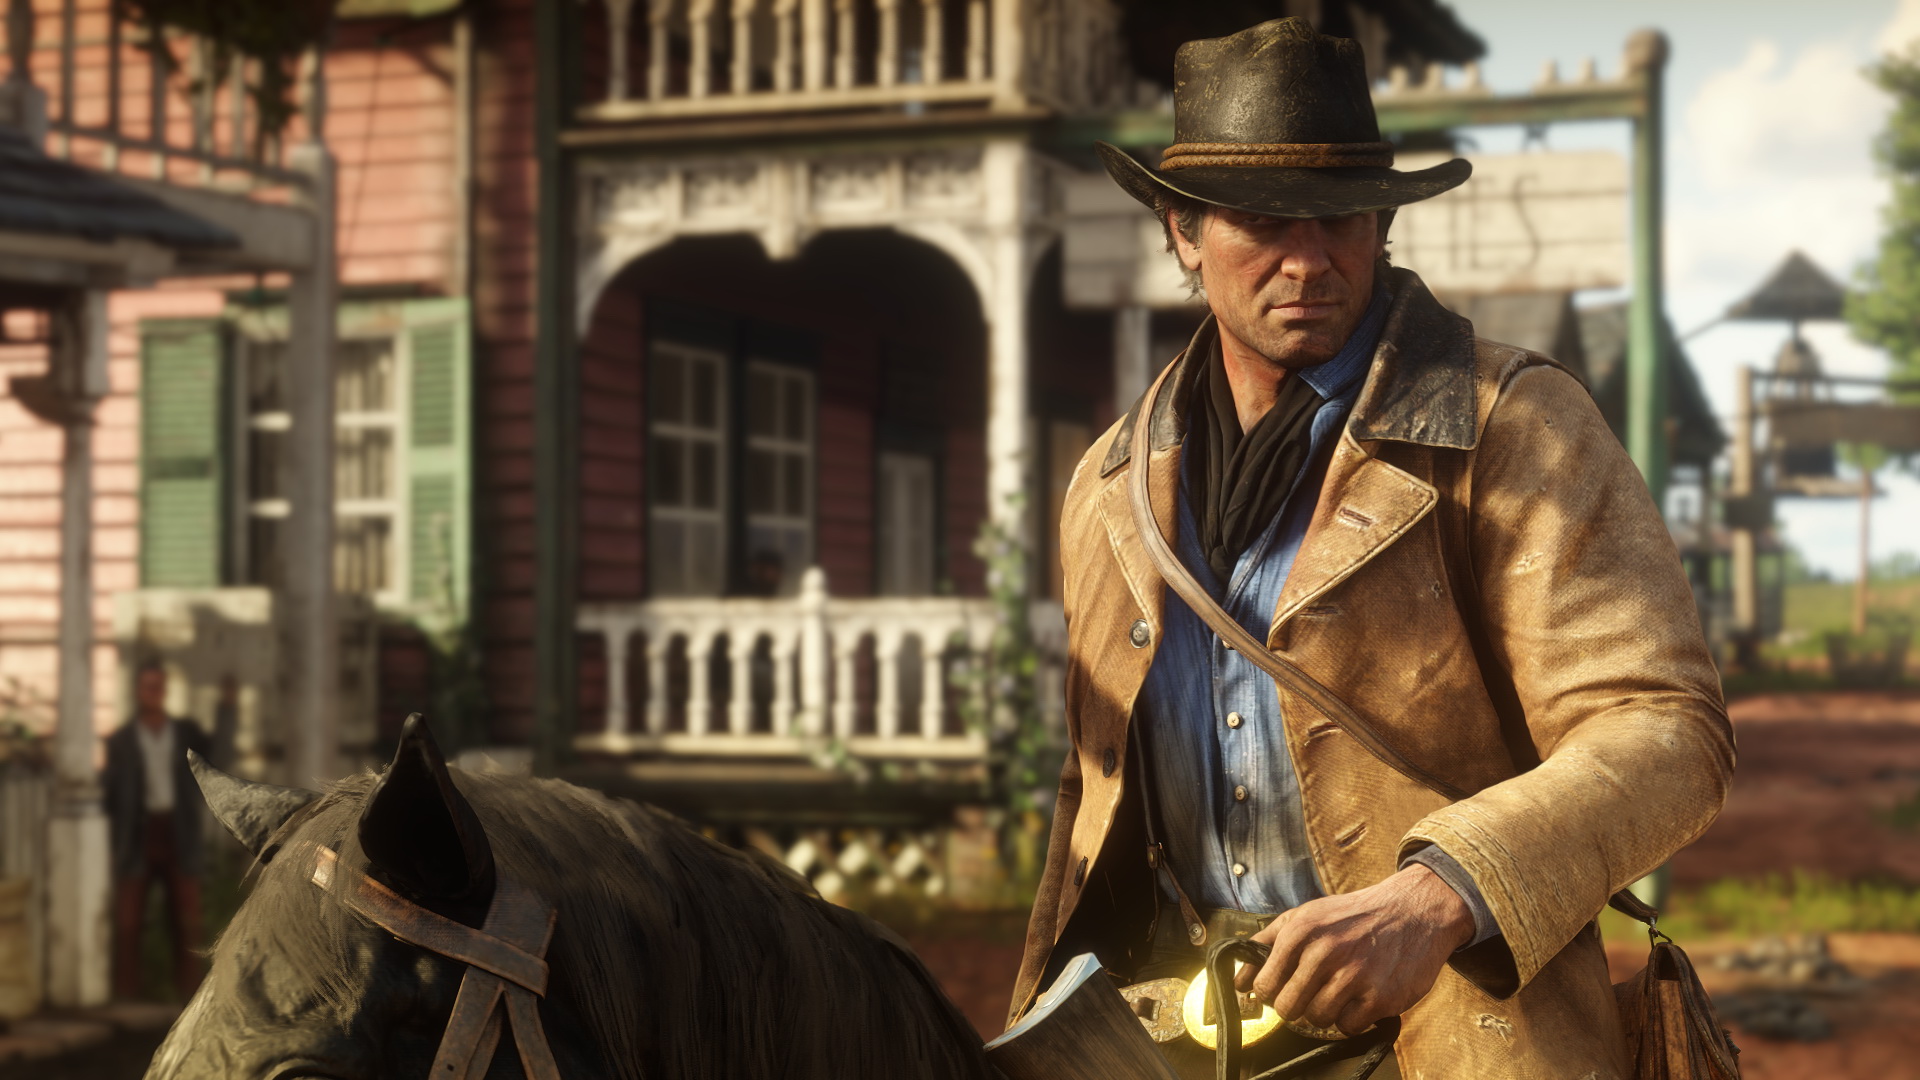 First Look Previews of Red Dead Redemption 2 - Rockstar Games